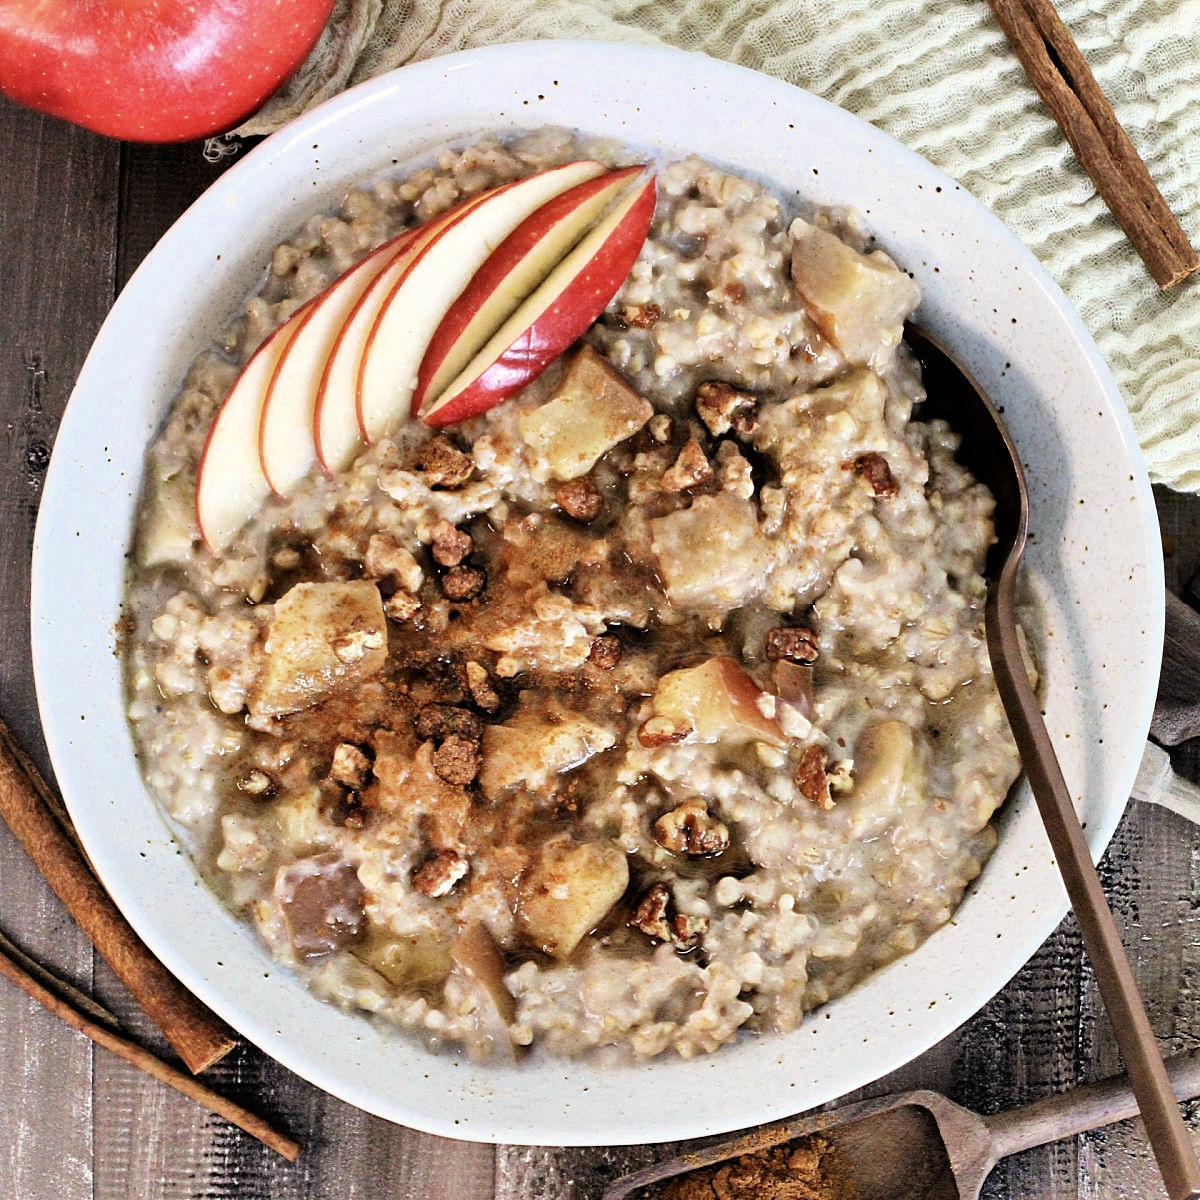 Easy Crockpot Apple Cinnamon Oatmeal in a bowl garnished with apple slices and cinnamon on a wooden board with an apple, cinnamon sticks and measuring spoons around it.